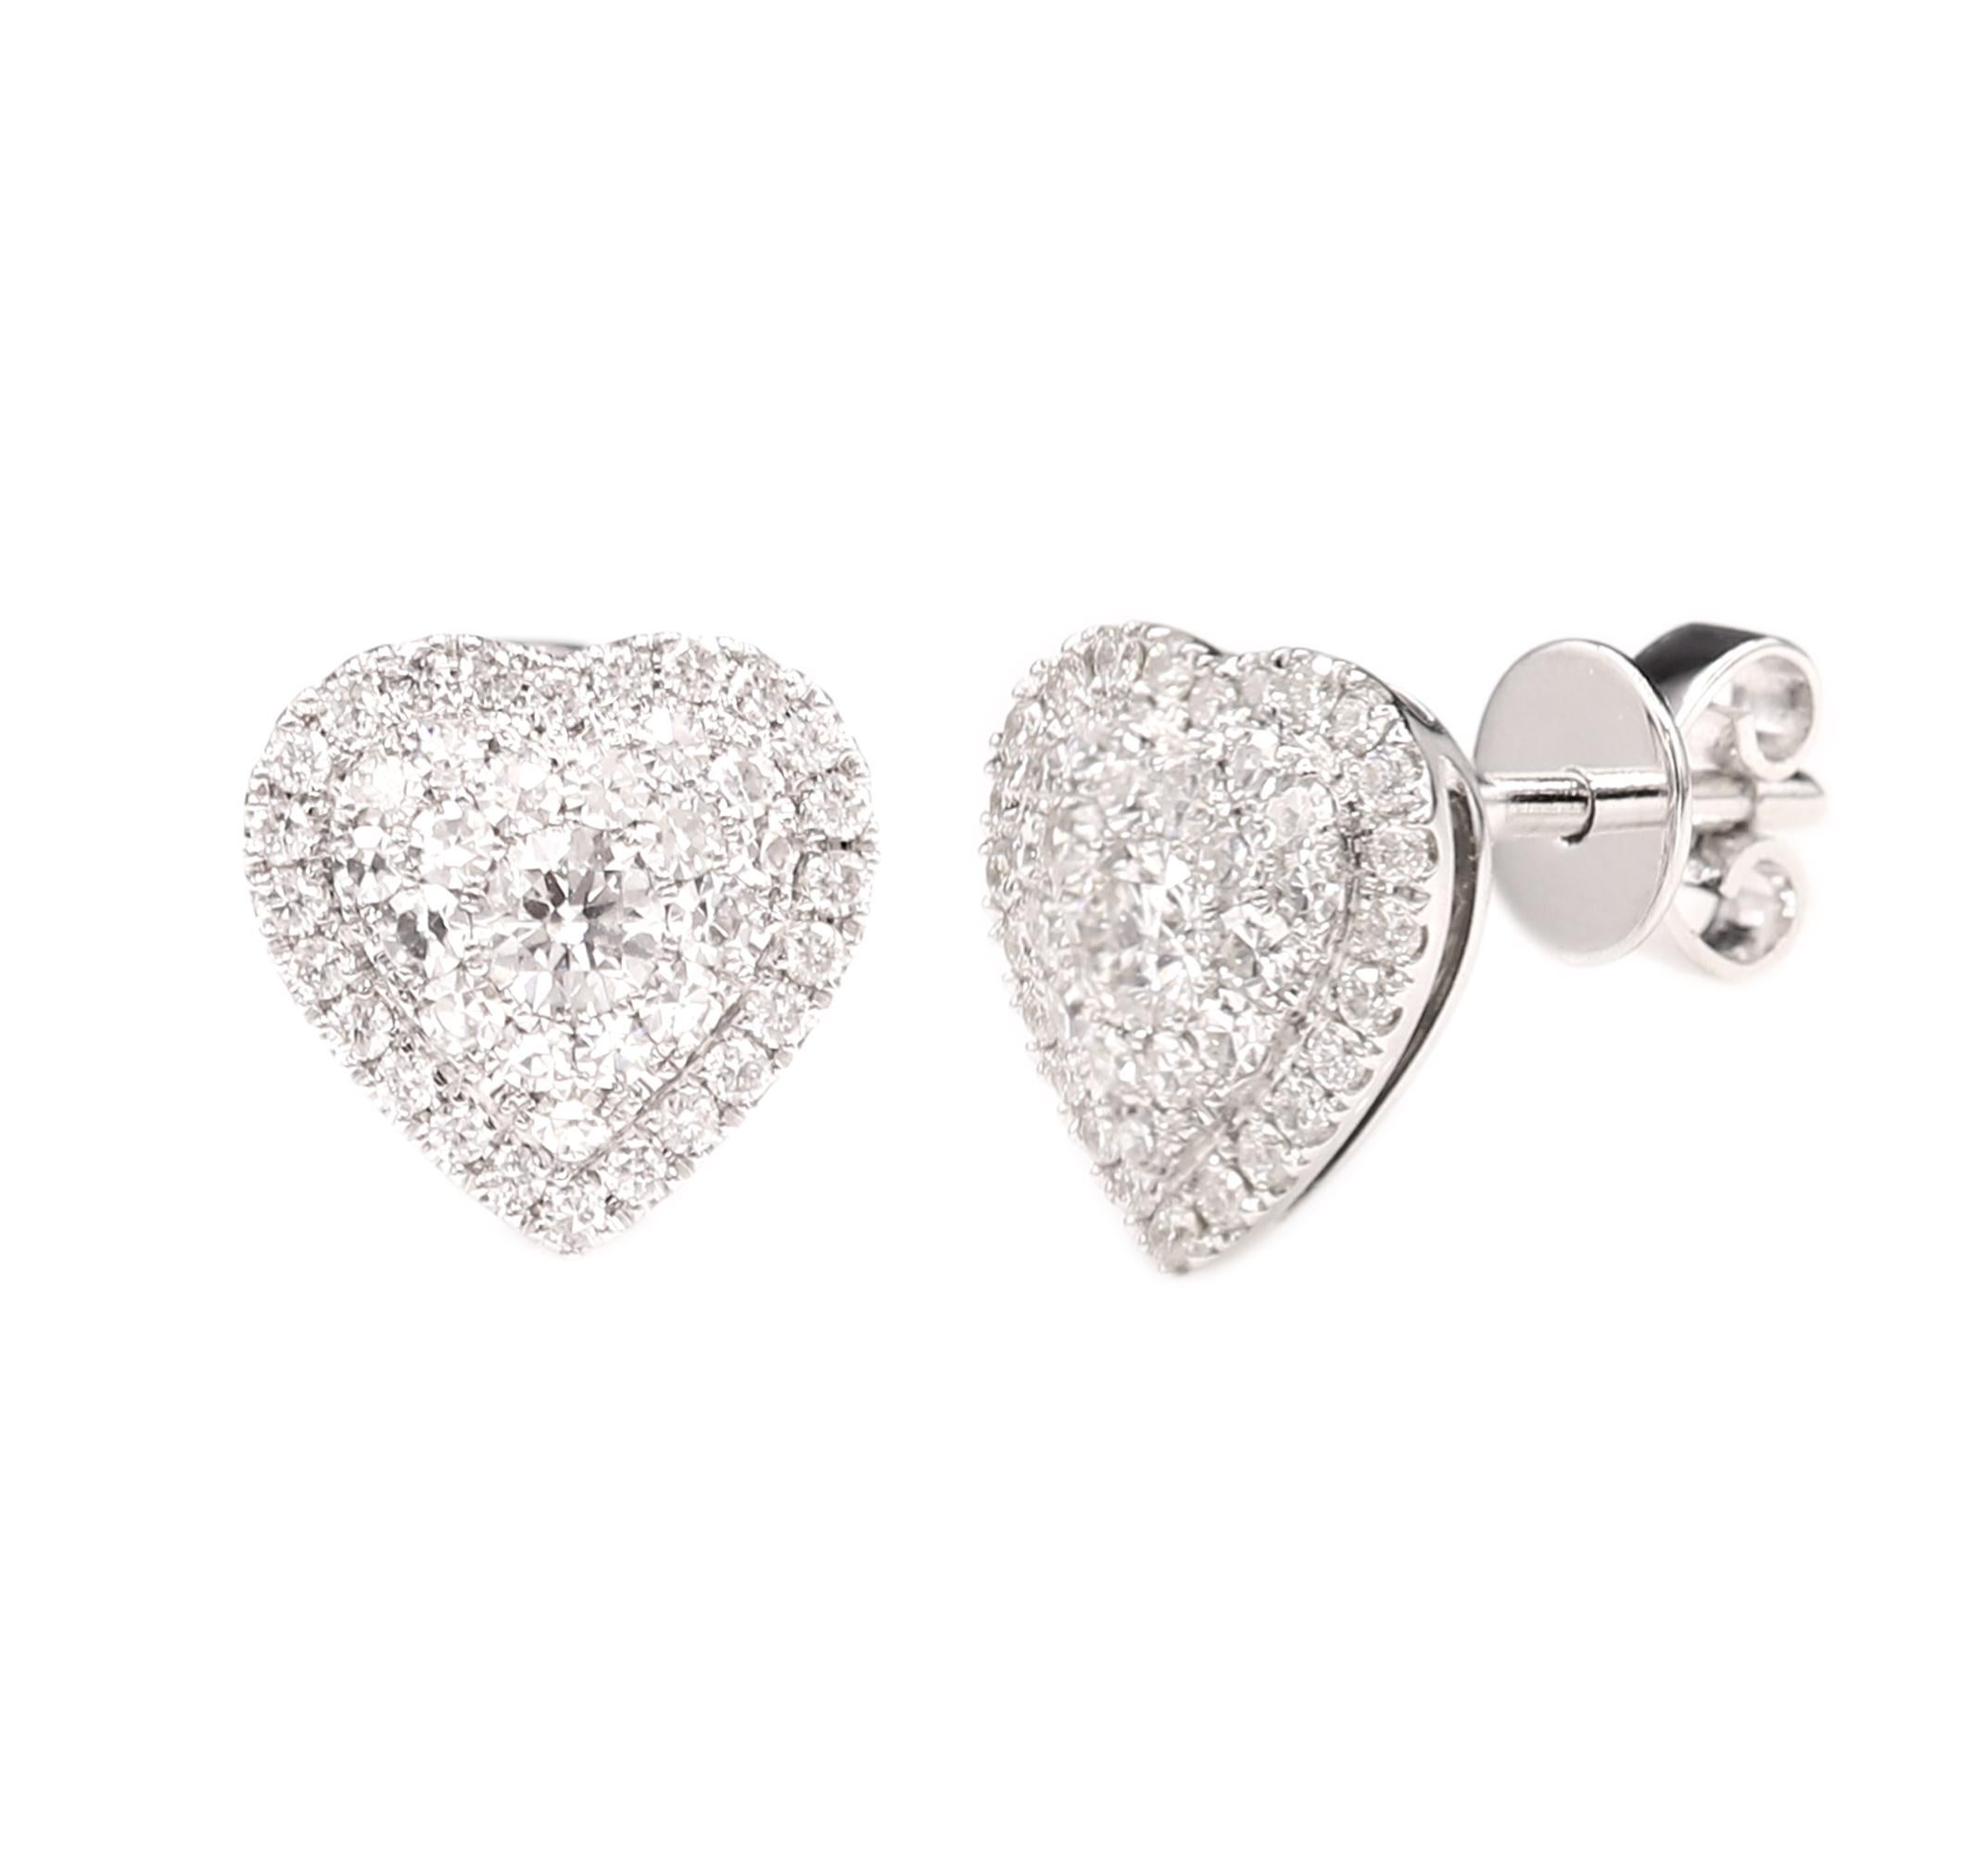 These Hearts are Super Cluster Hearts of Brilliant Diamonds, The special craftsmanship makes the diamonds visible to the eye as one large diamond, must see it to believe it ! Heart size approx 10 mm, 18k white gold 3.30 grams.
Total Diamonds 0.70